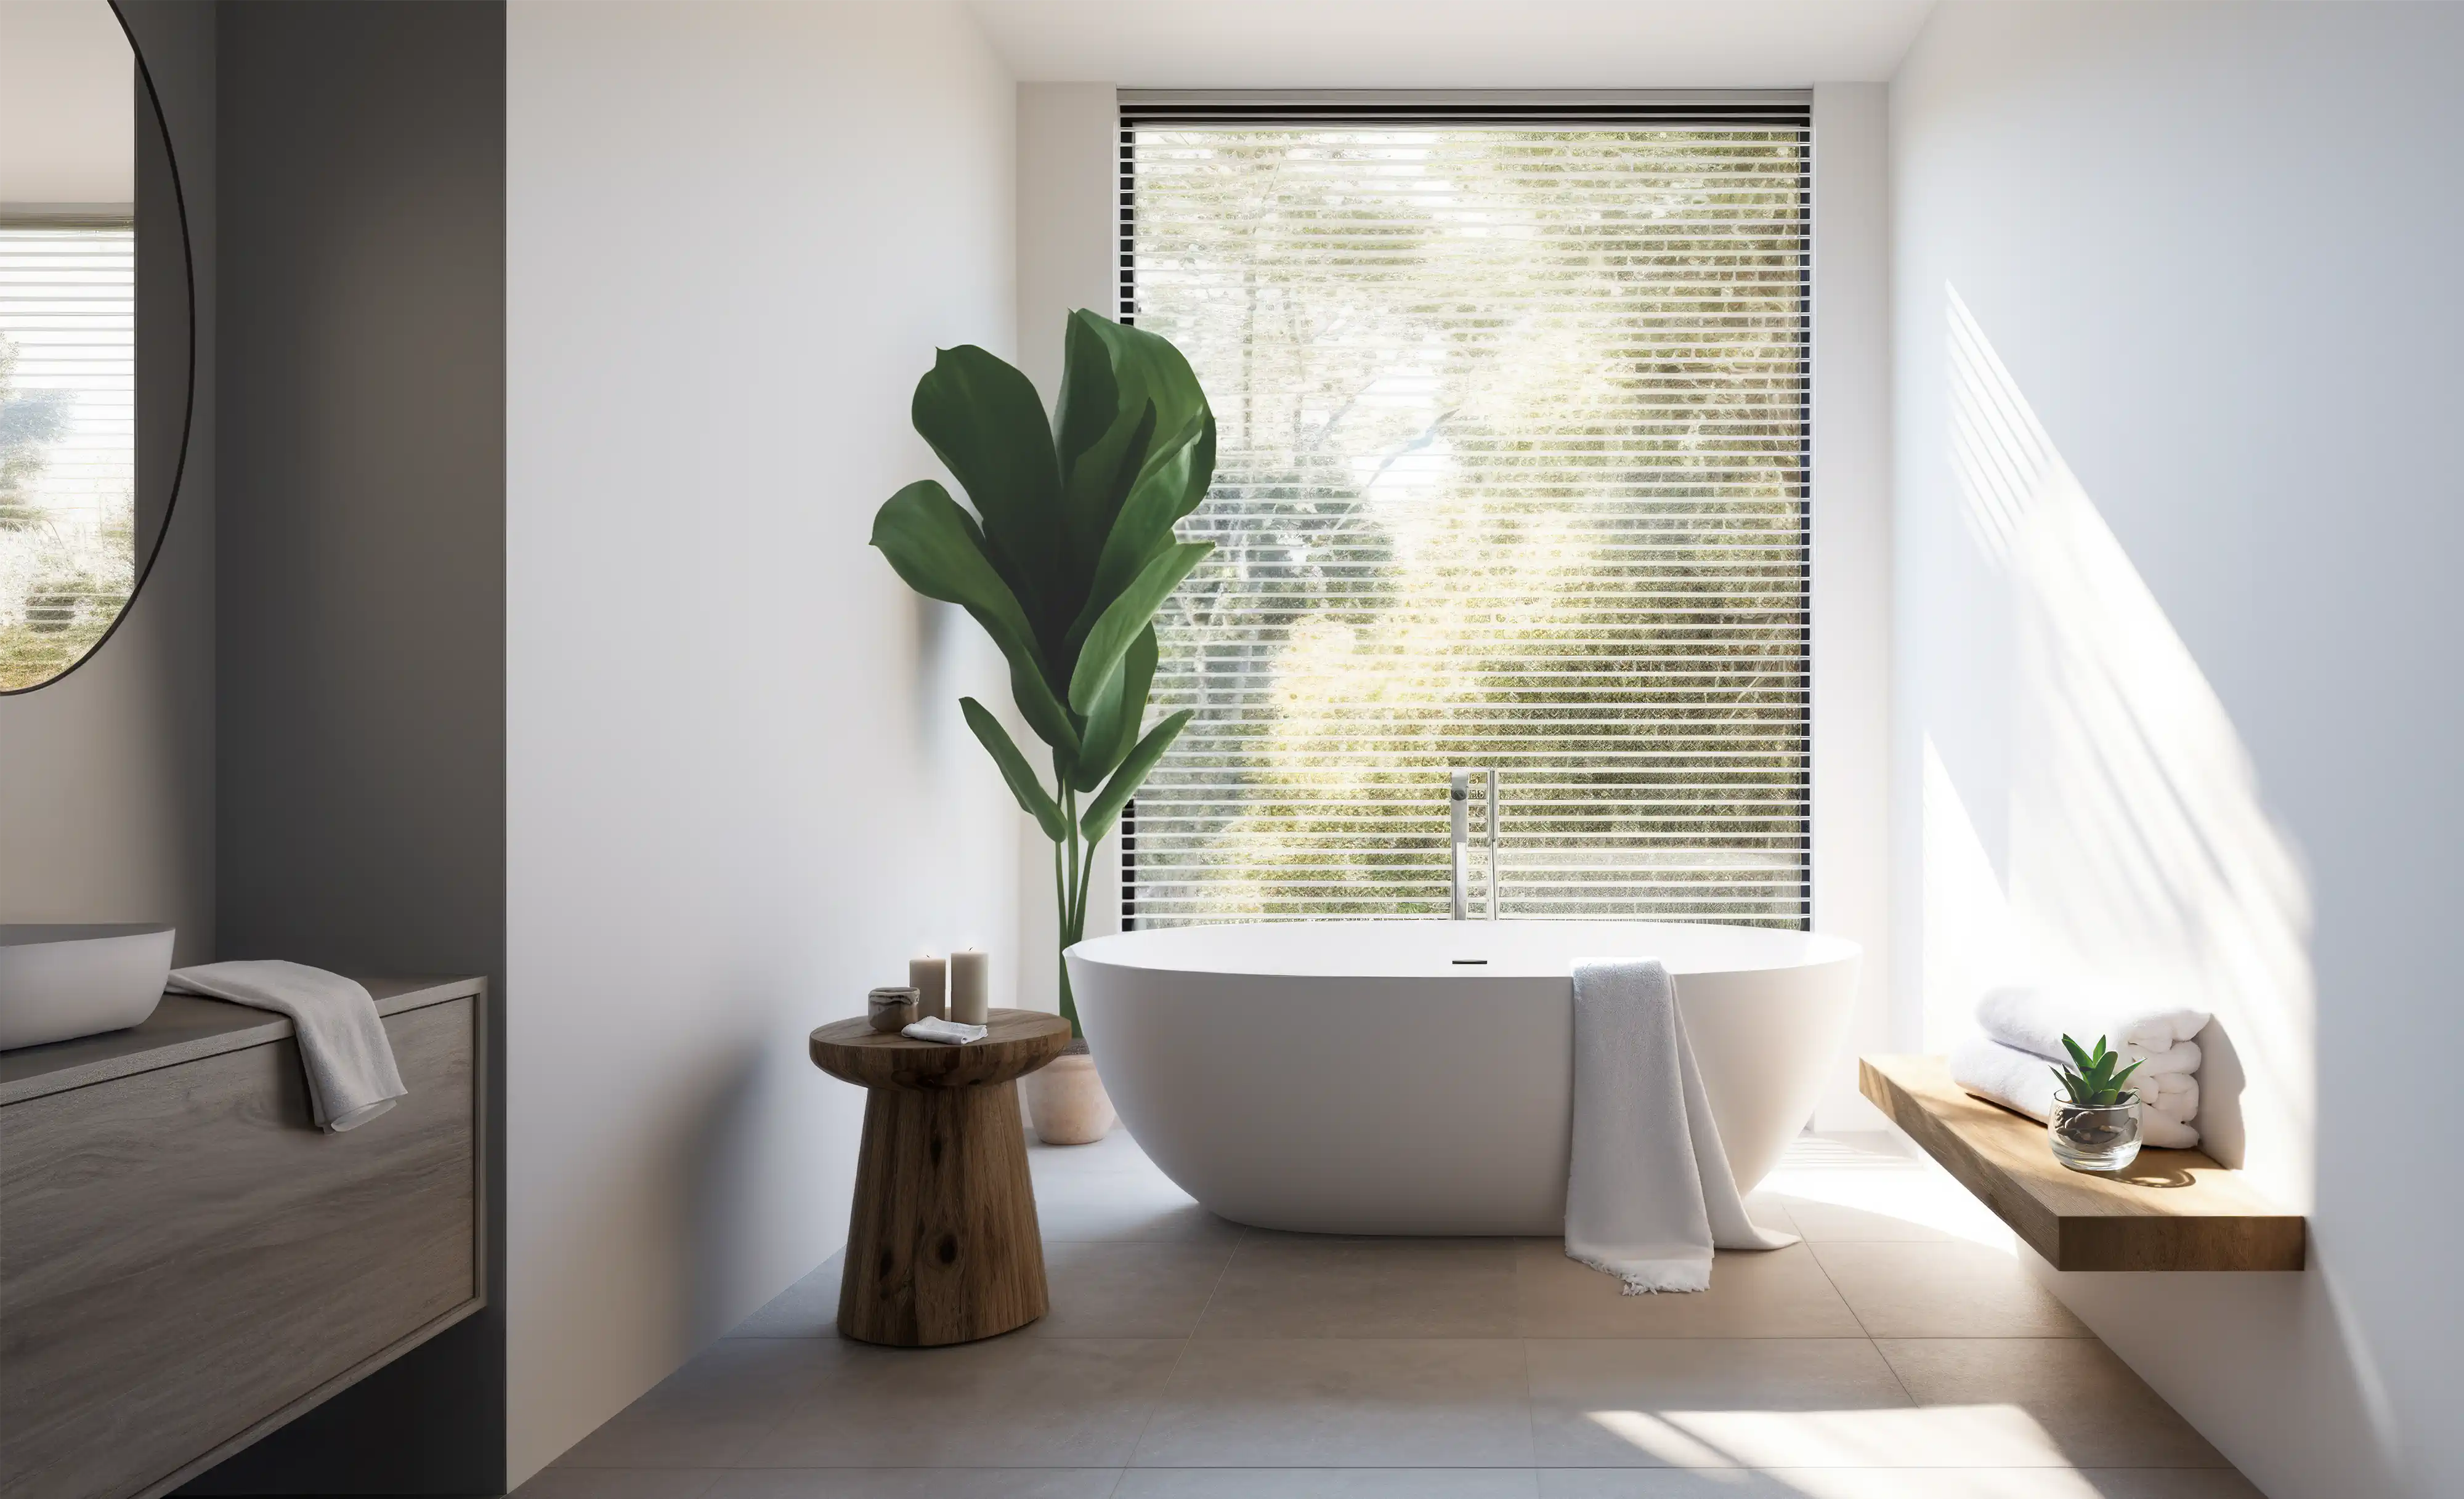 A modern bathroom with a freestanding bathtub, a large window with a green view and wooden accents, interior by Sarah Brown Design